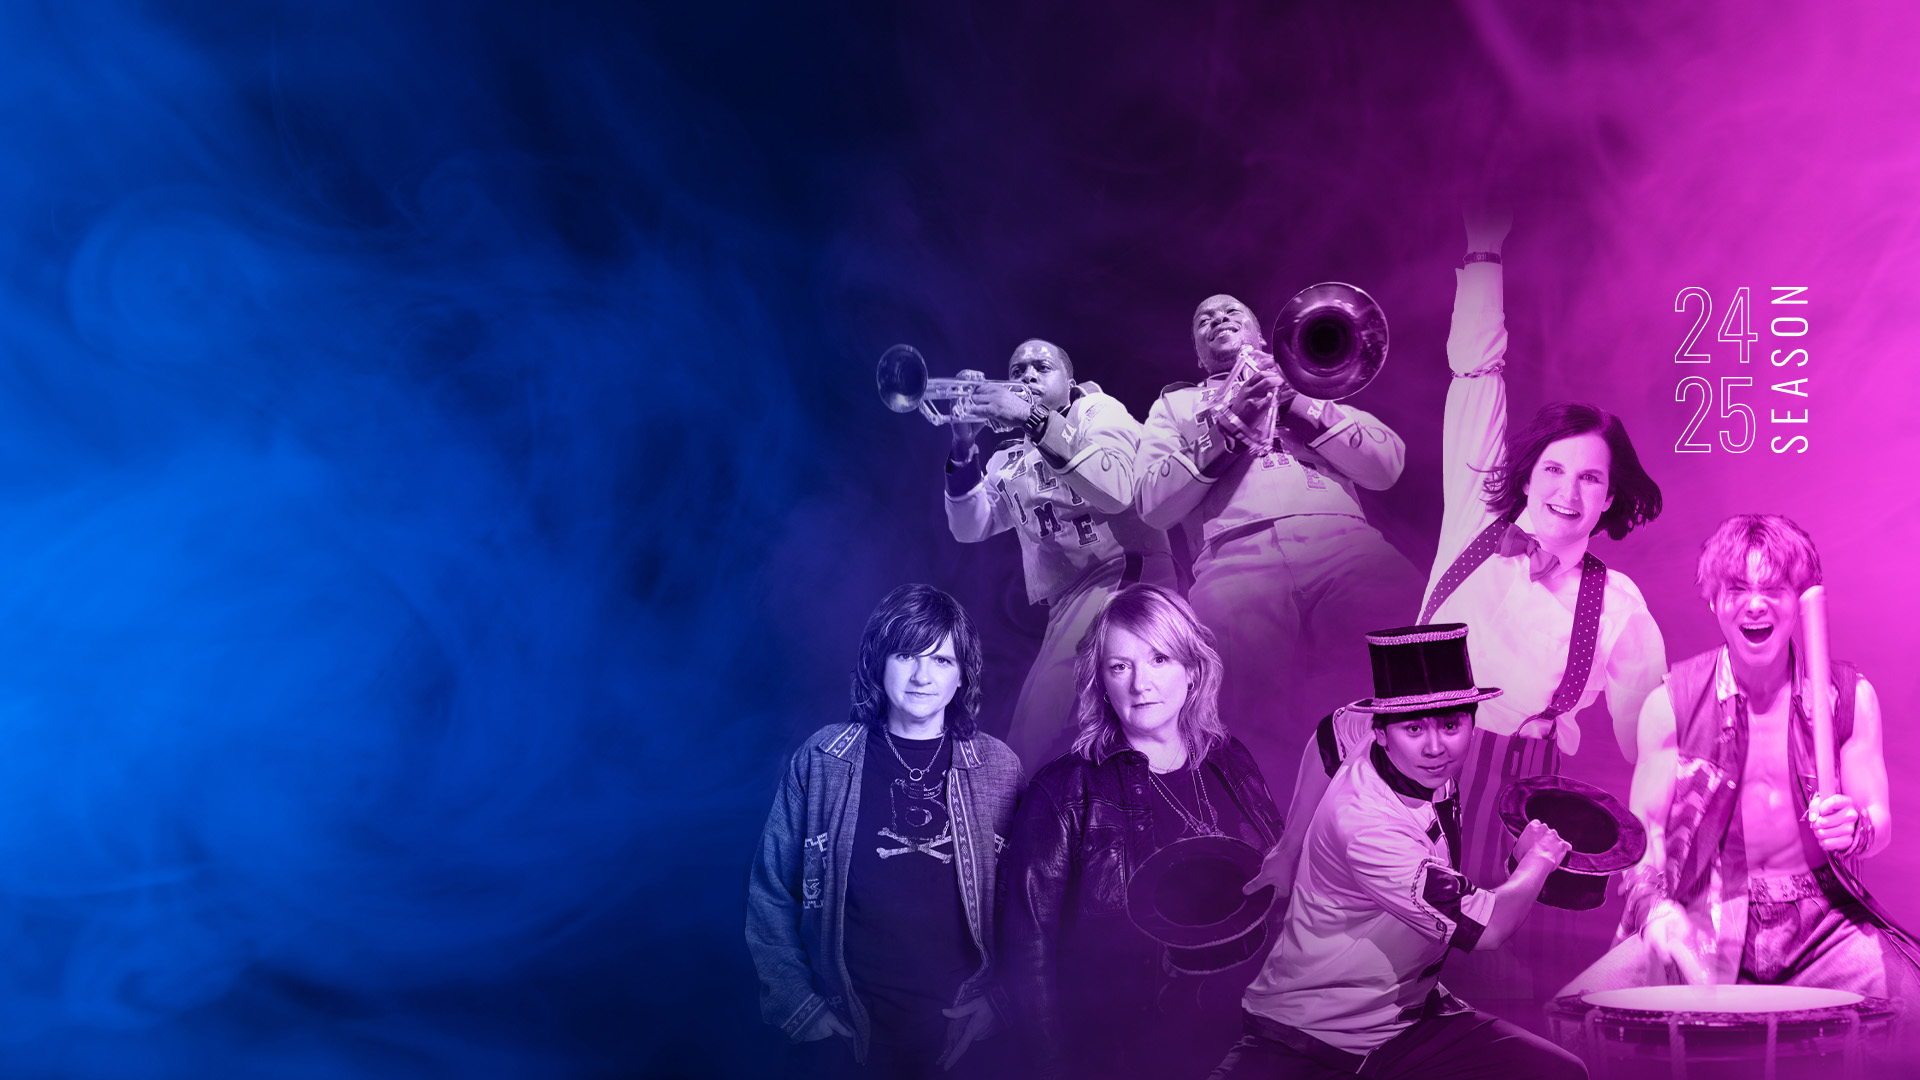 Collage of artists on a purple and blue smokey background 